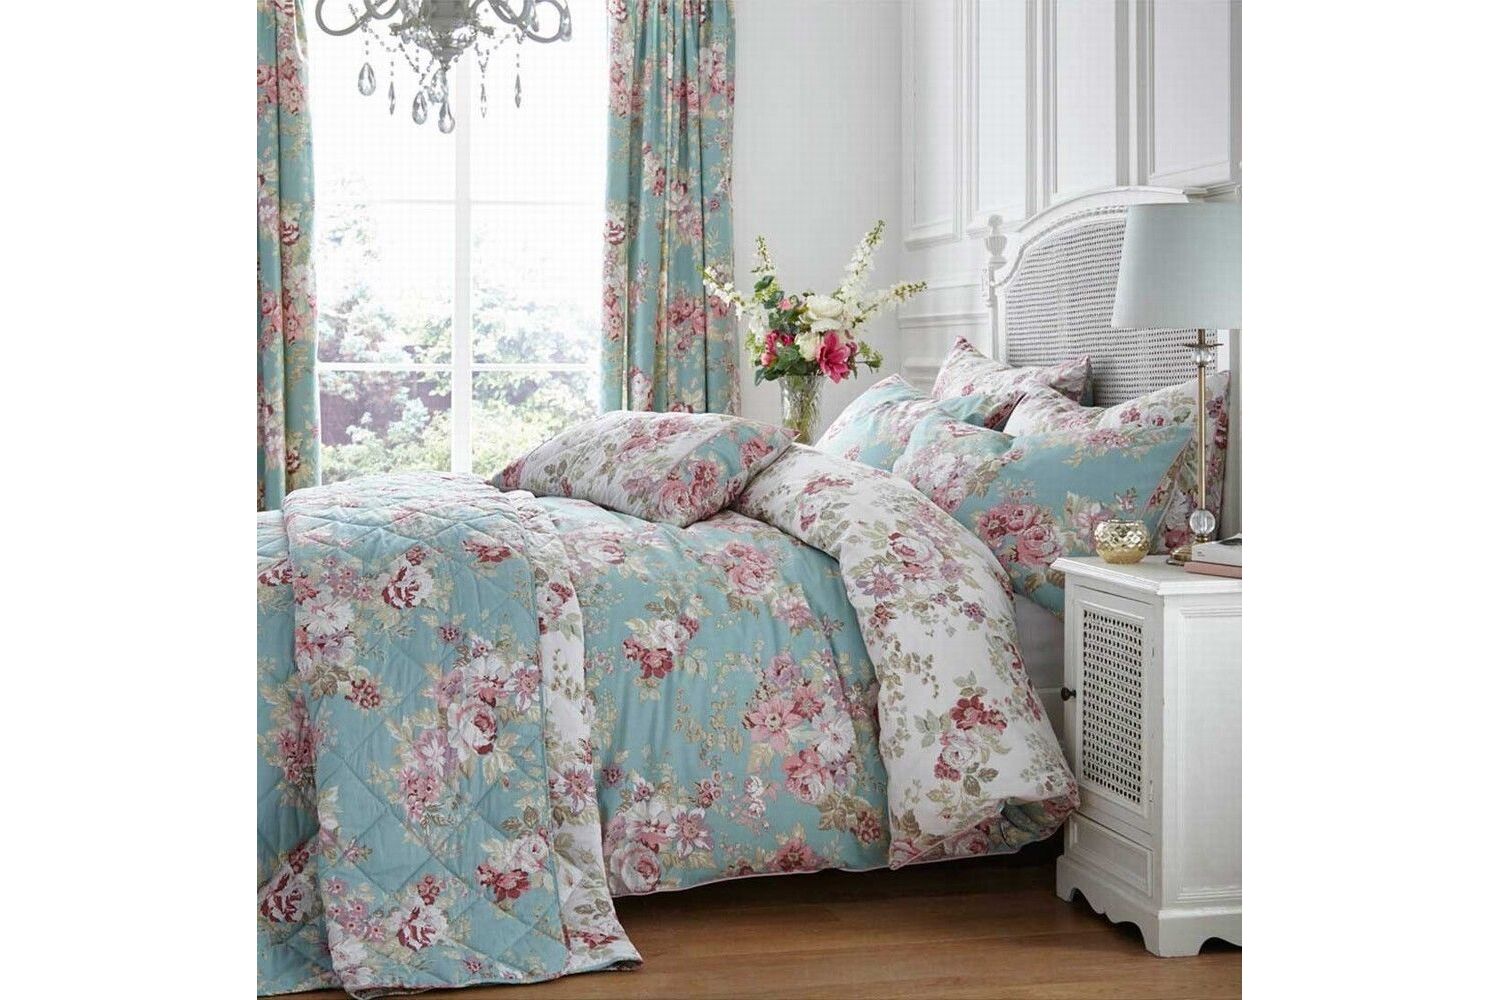 Dorma Country Floral Duvet Cover Set Double Bed Only 35 00